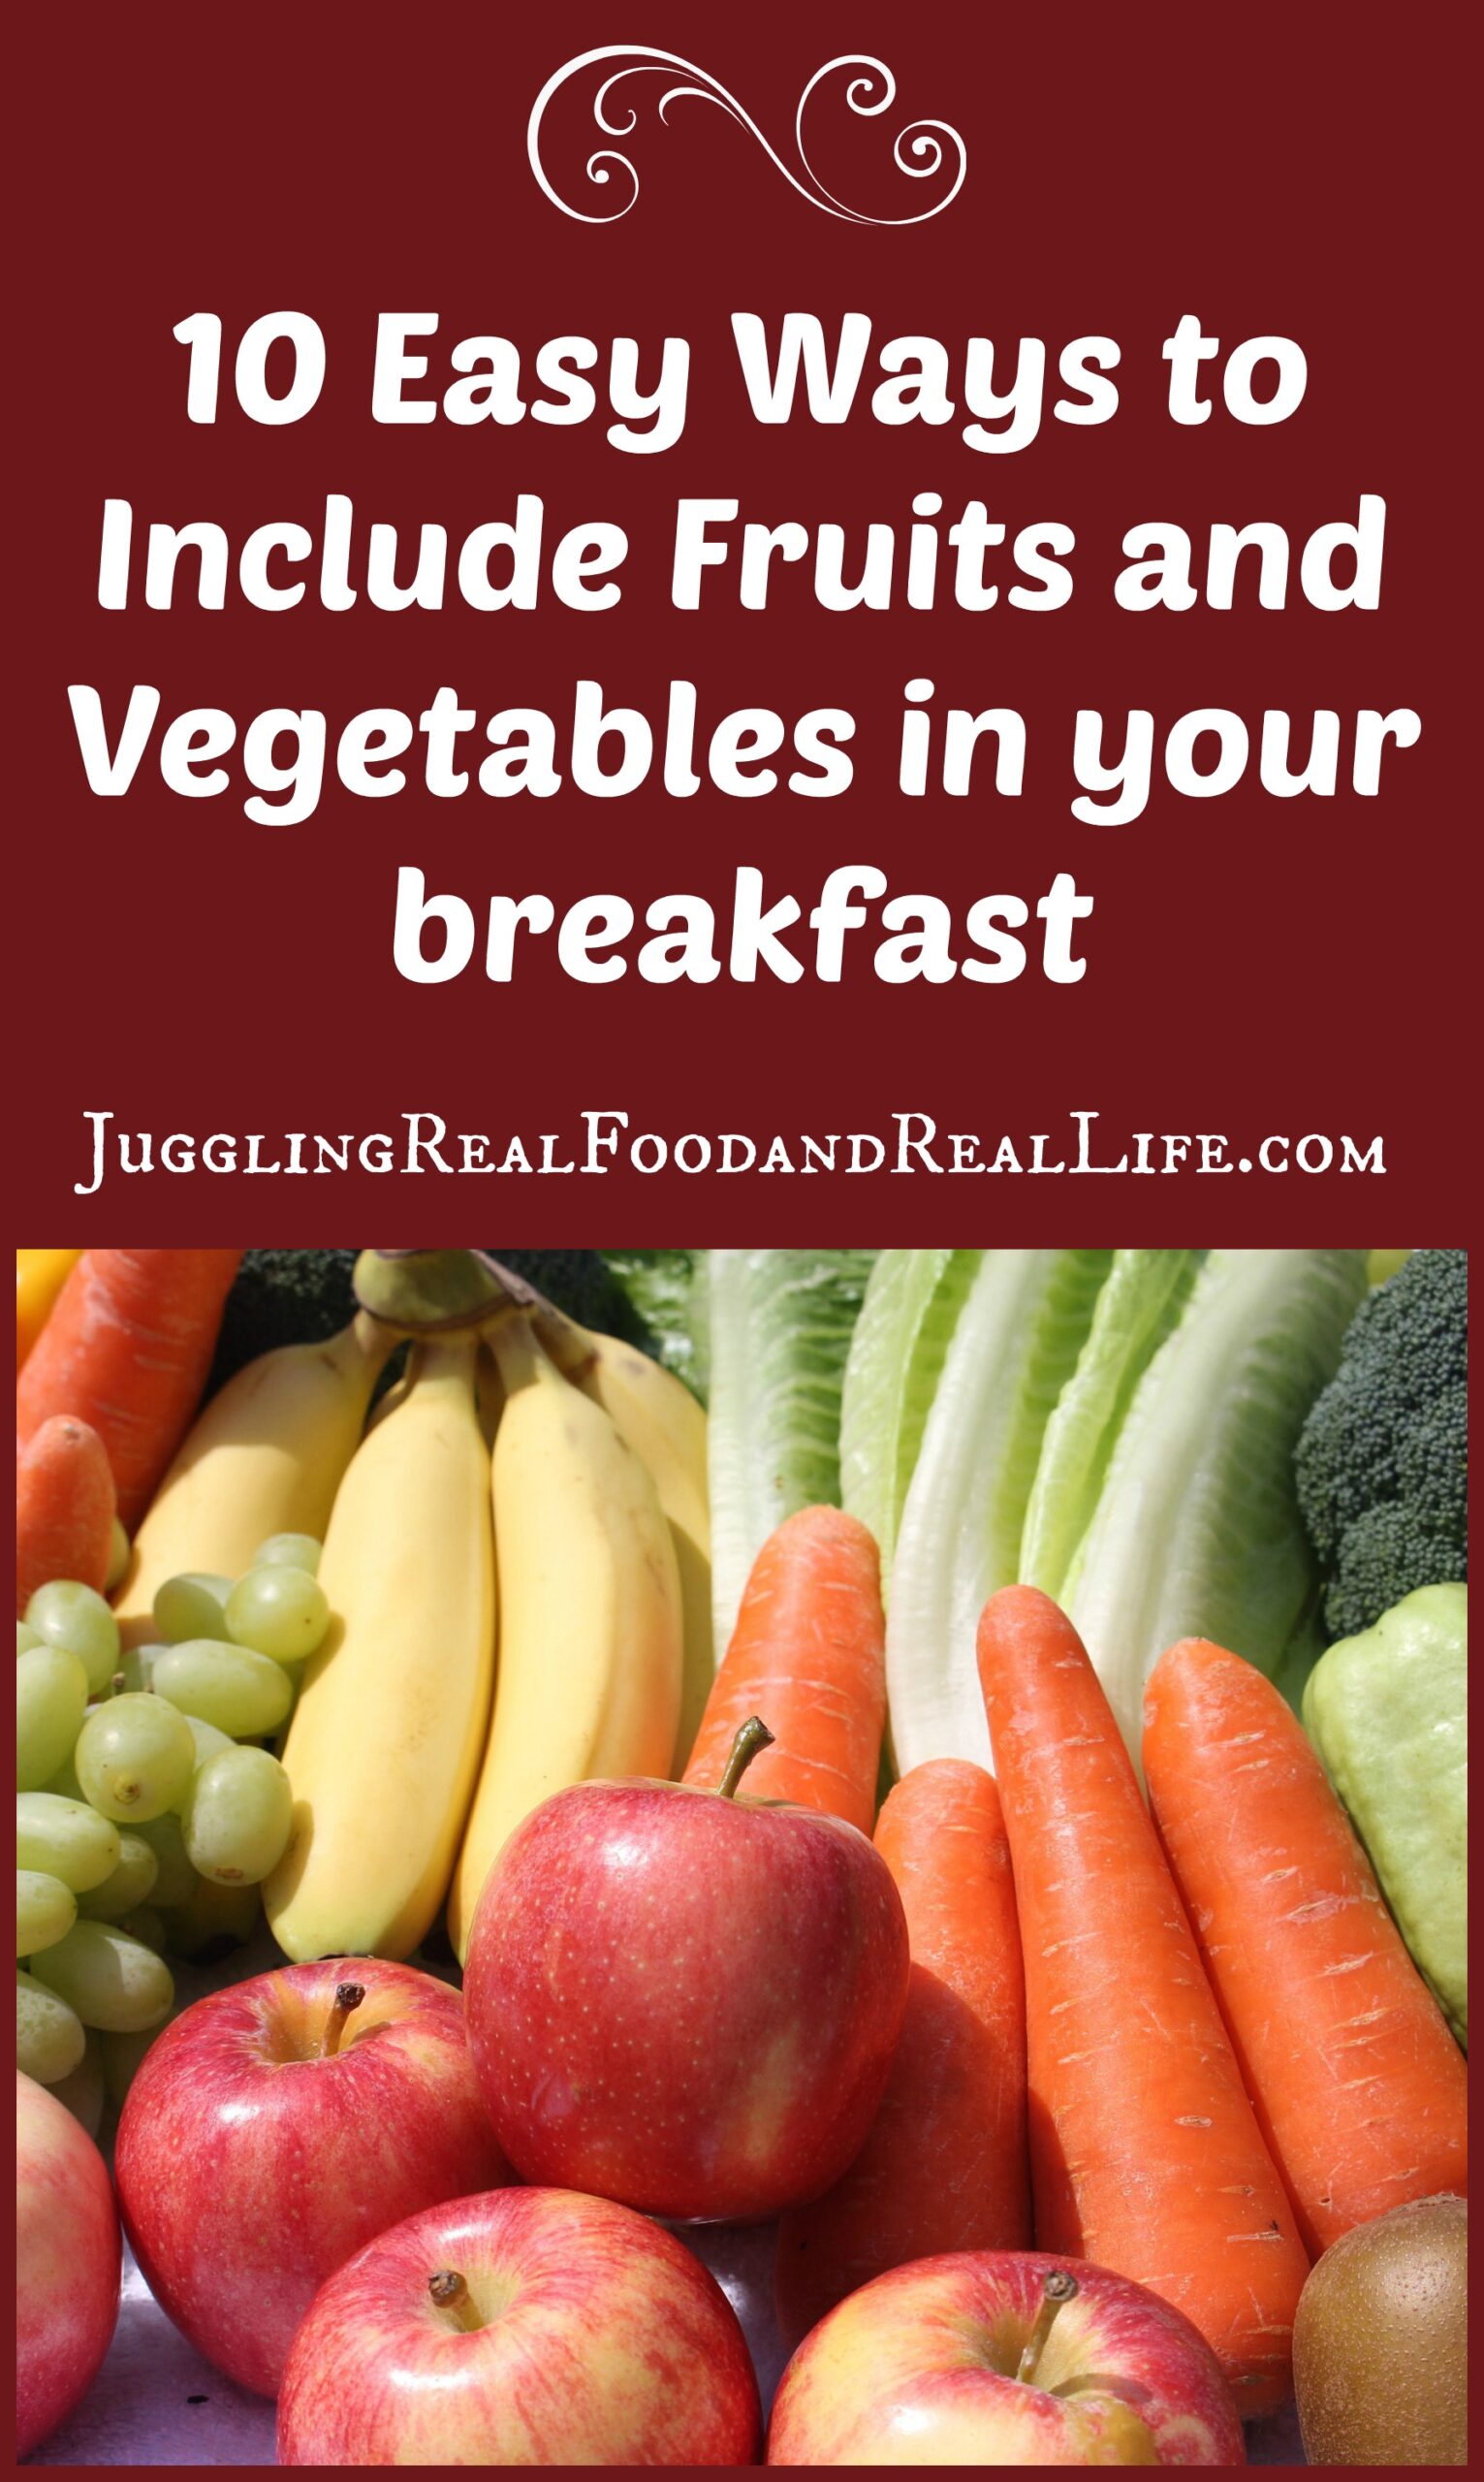 10 Easy Ways to Include Fruits and Veggies In Your Breakfast – Juggling Real Food and Real Life